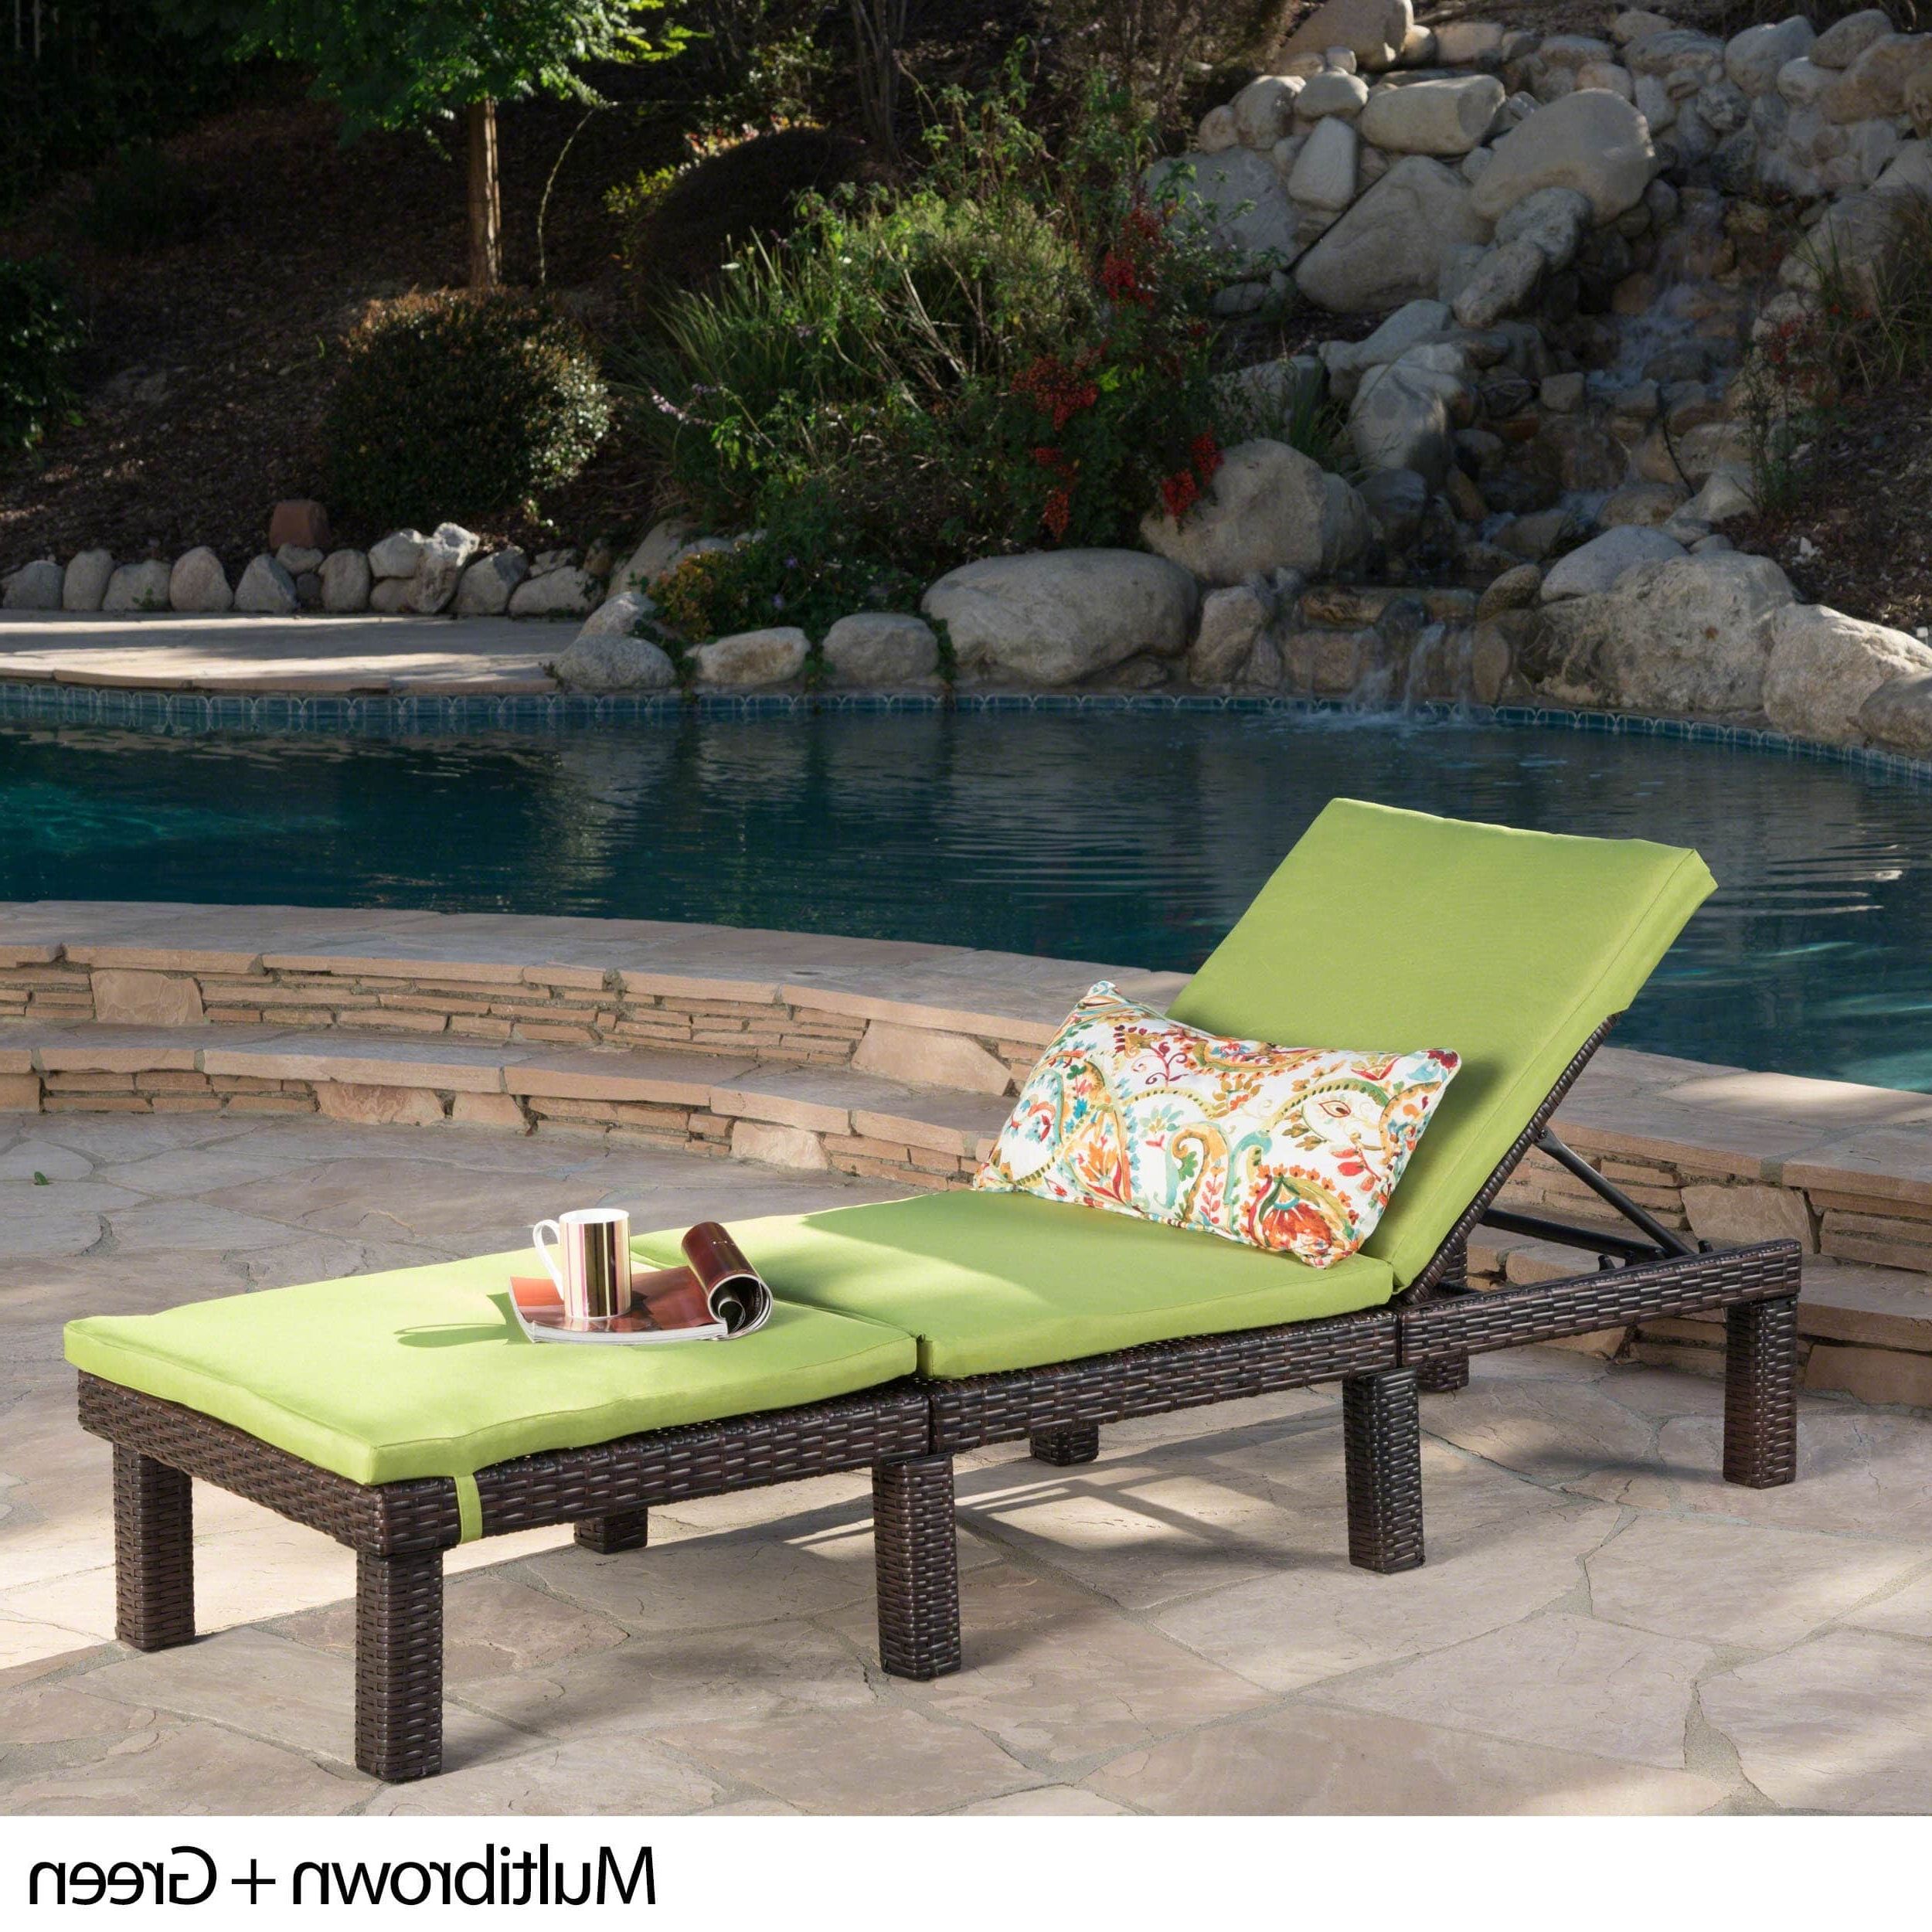 Christopher Knight Home Jamaica Outdoor Chaise Lounge With Cushion By Intended For Recent Jamaica Outdoor Wicker Chaise Lounges (View 11 of 25)